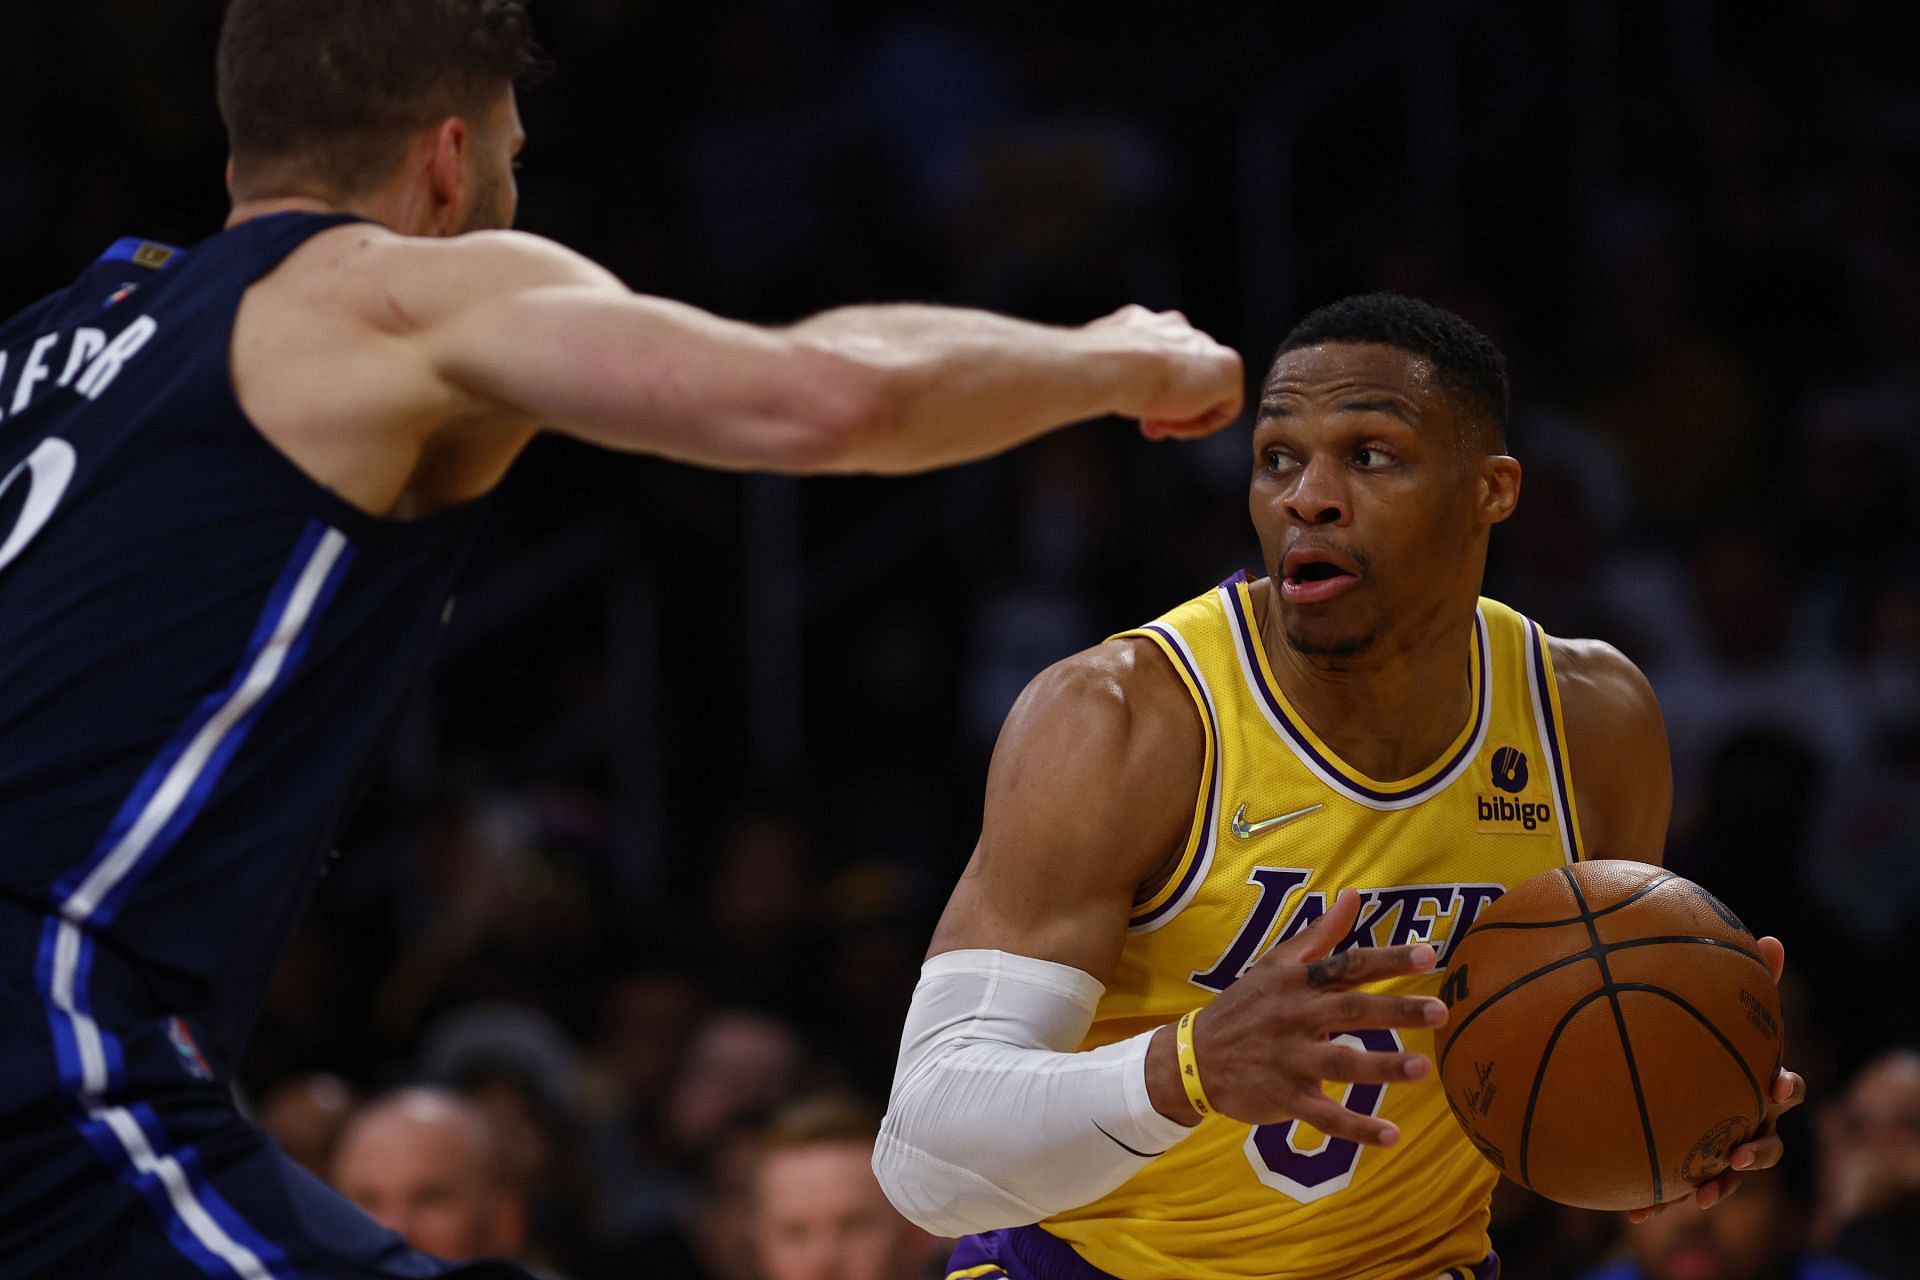 Russell Westbrook of the LA Lakers at Crypto.com Arena on March 1 in Los Angeles, California.